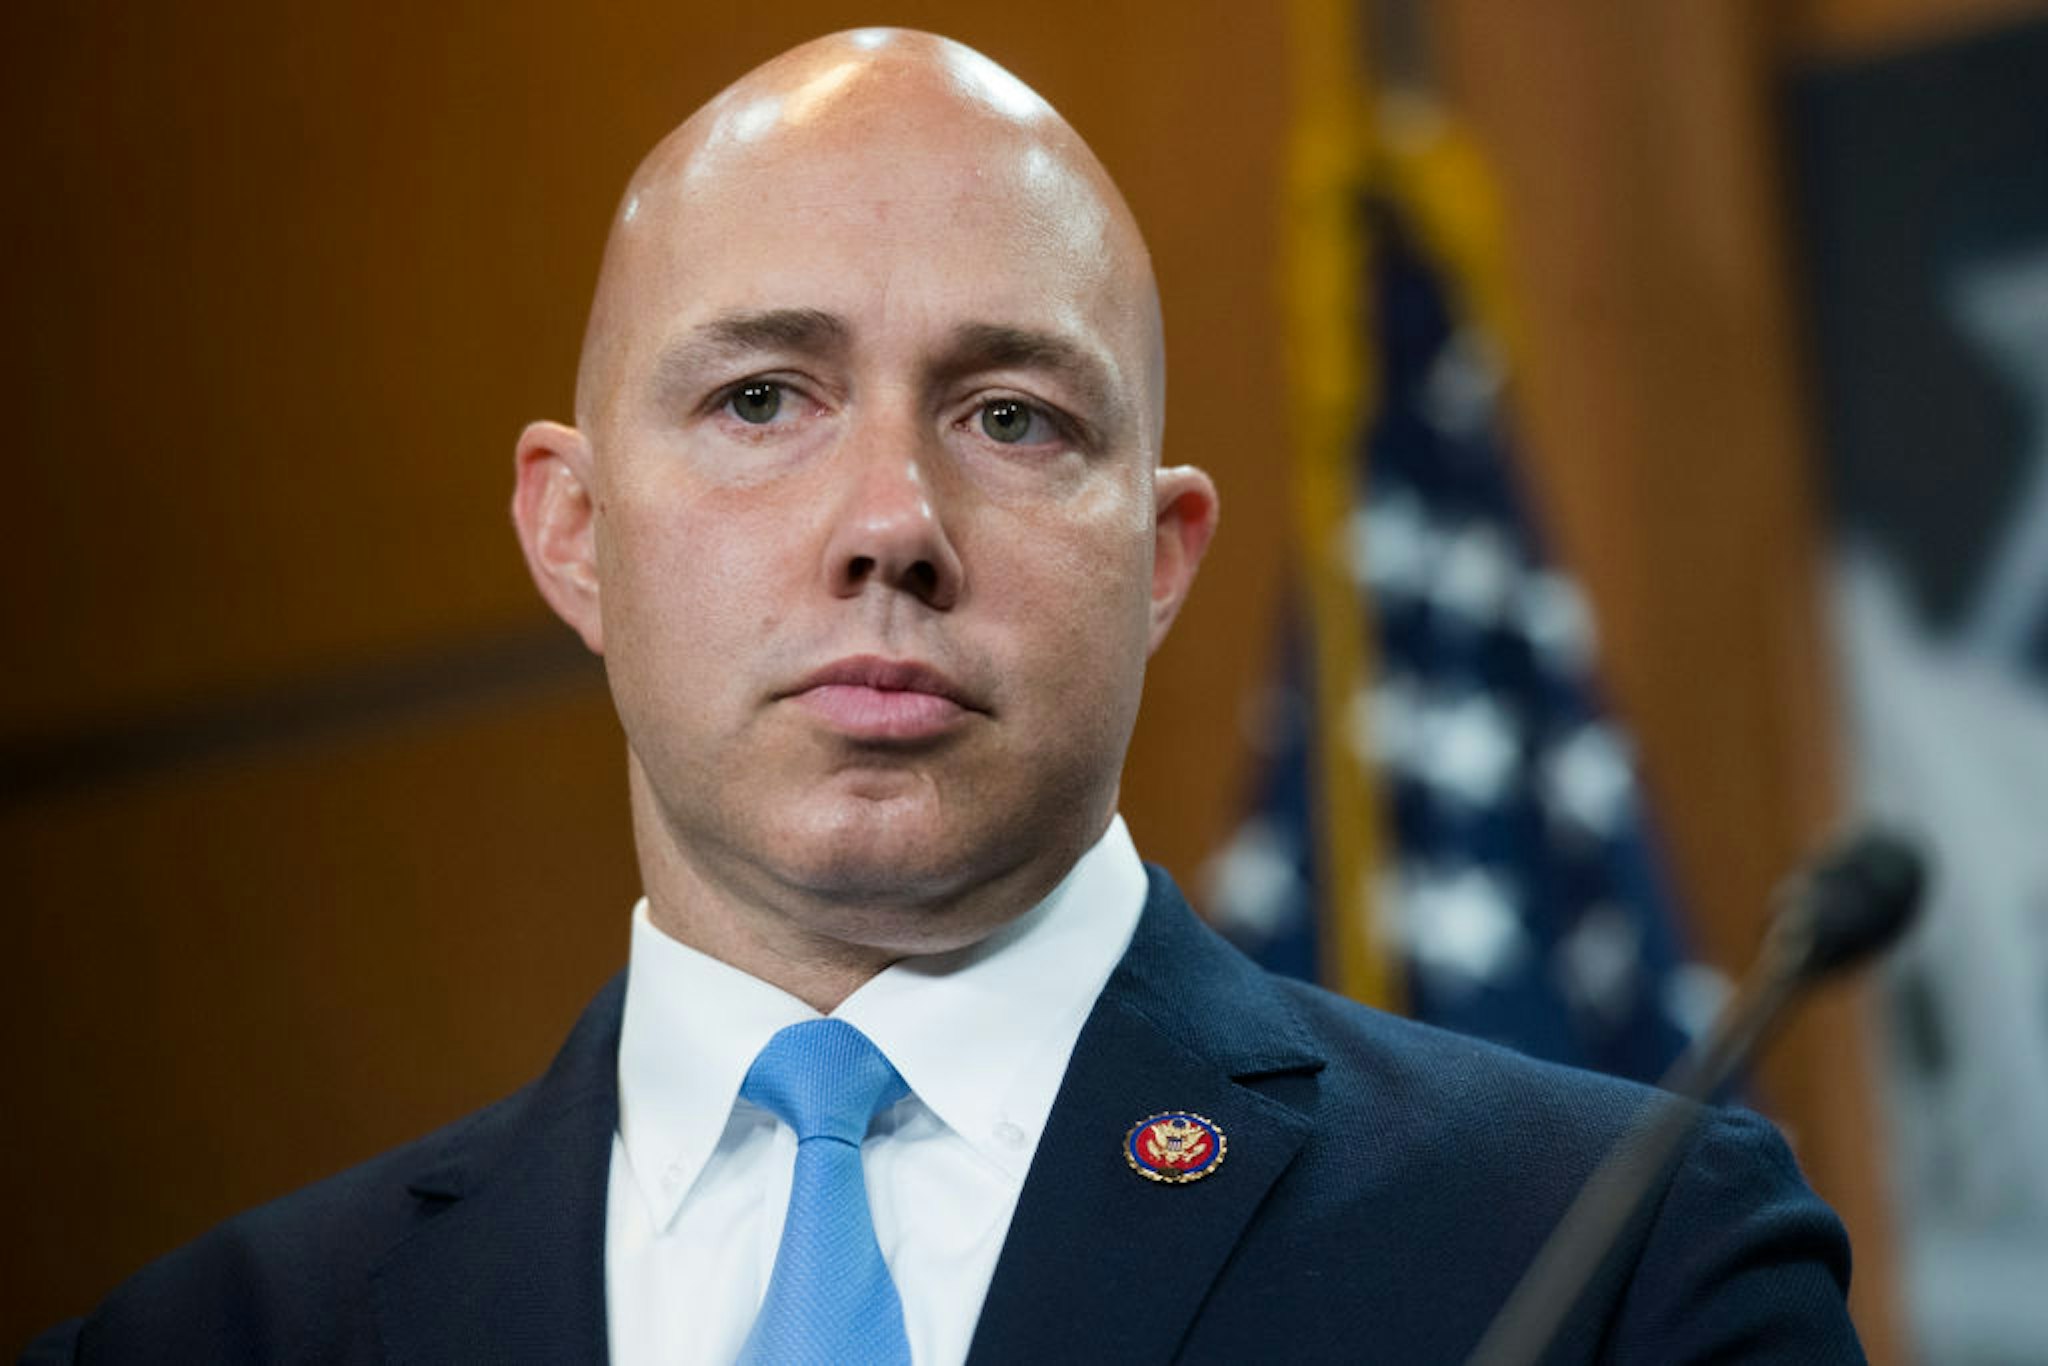 Rep. Brian Mast, R-Fla., conducts a news conference in the Capitol Visitor Center on the eviction of Congressional offices from Veterans Affairs Department facilities on Friday, September 20, 2019.